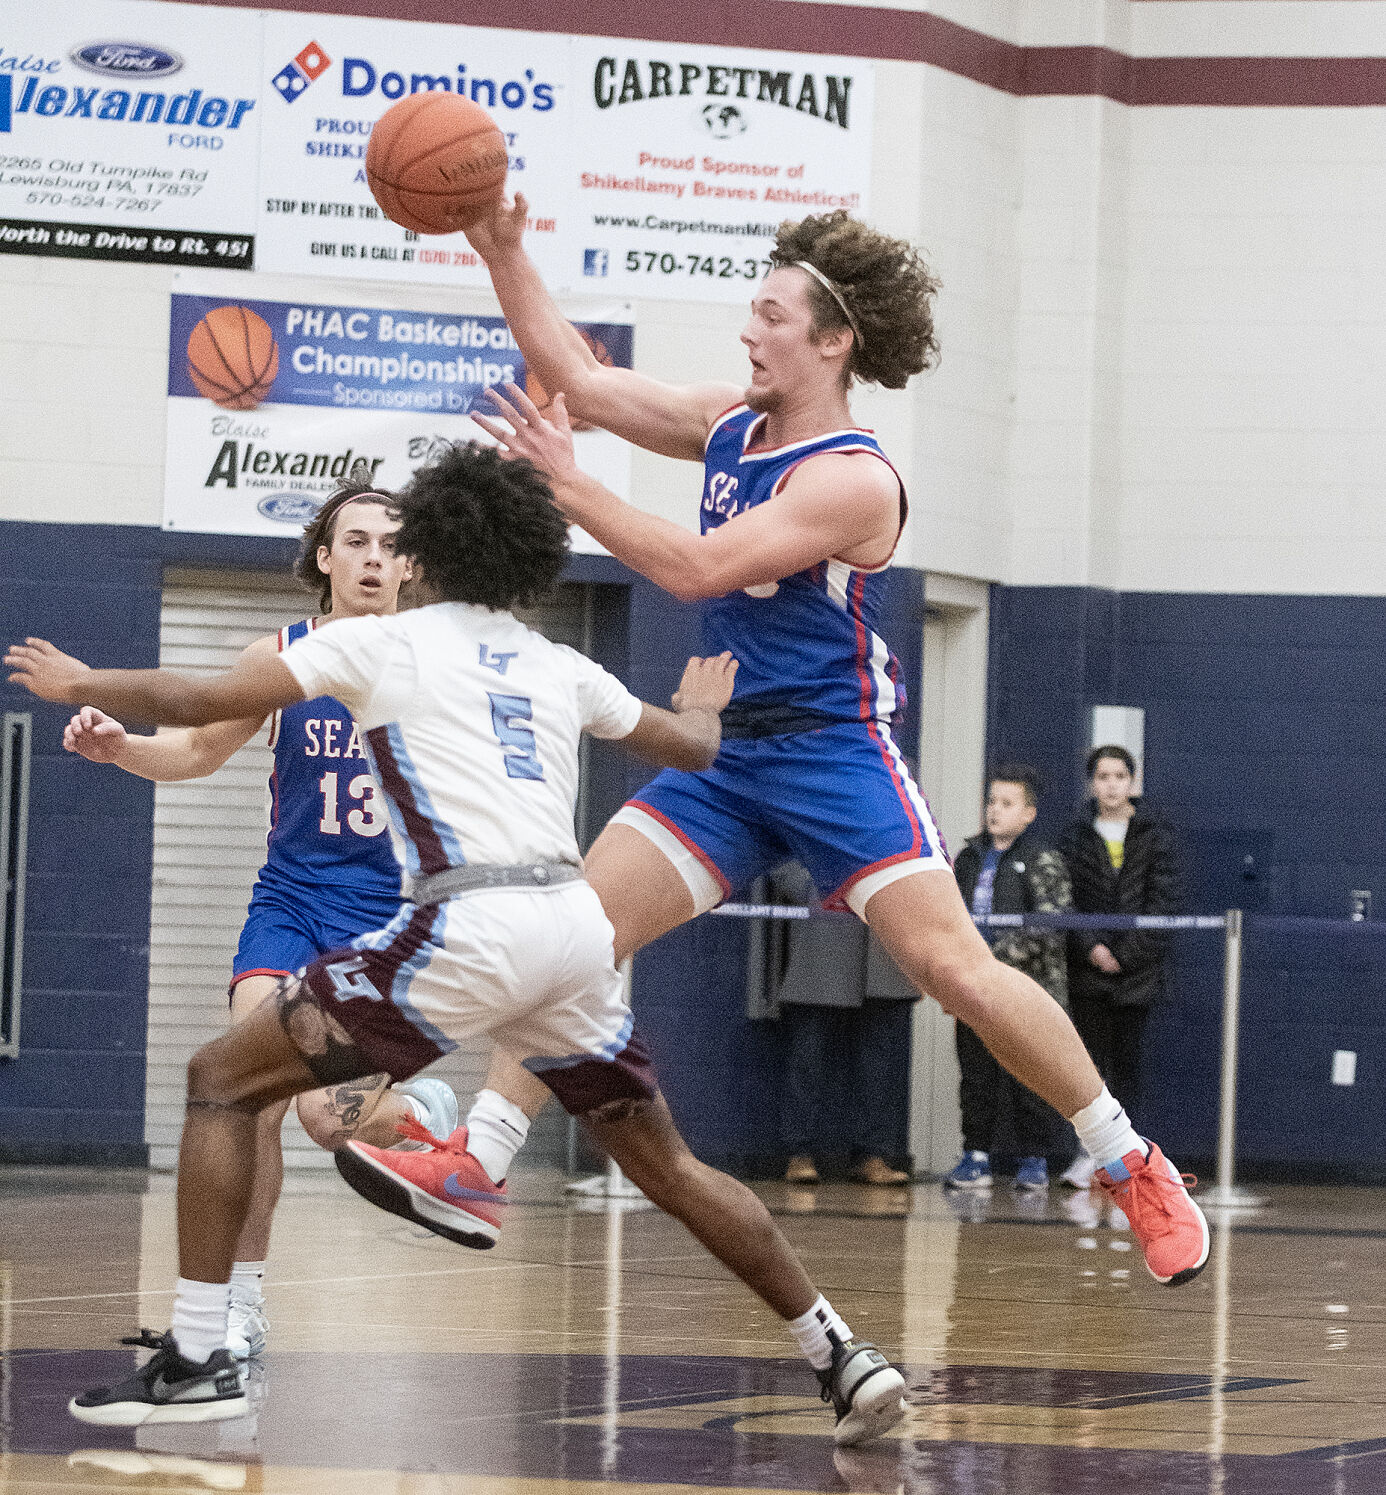 Selinsgrove Faces Tough Losses to Danville and Loyalsock, Prepares for District Playoffs with Coach’s Positive Outlook